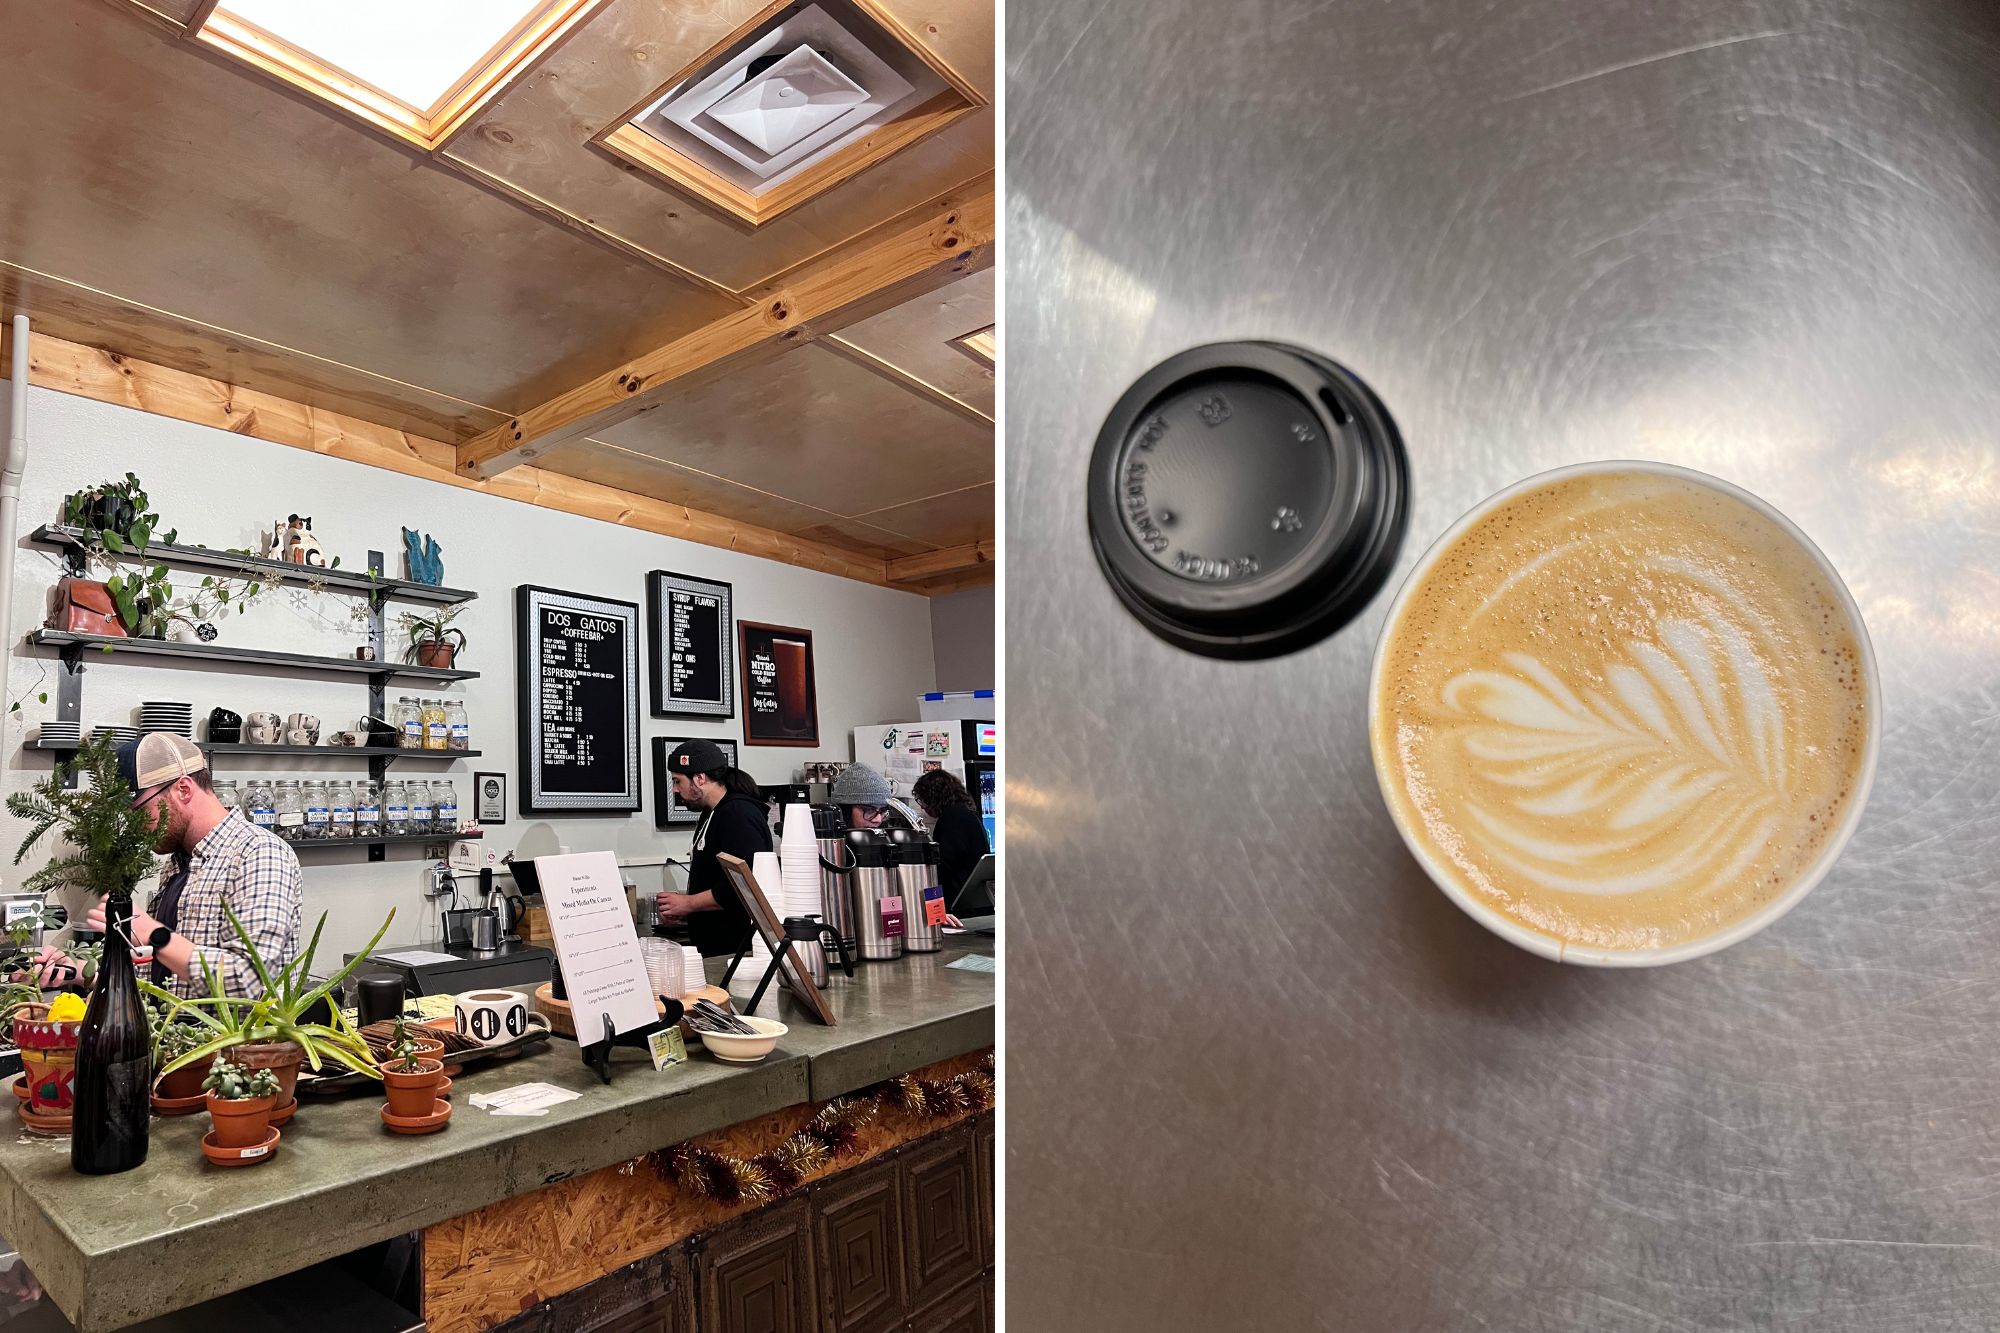 Two images: the coffee bar at Dos Gatos, and a cappuccino with latte art